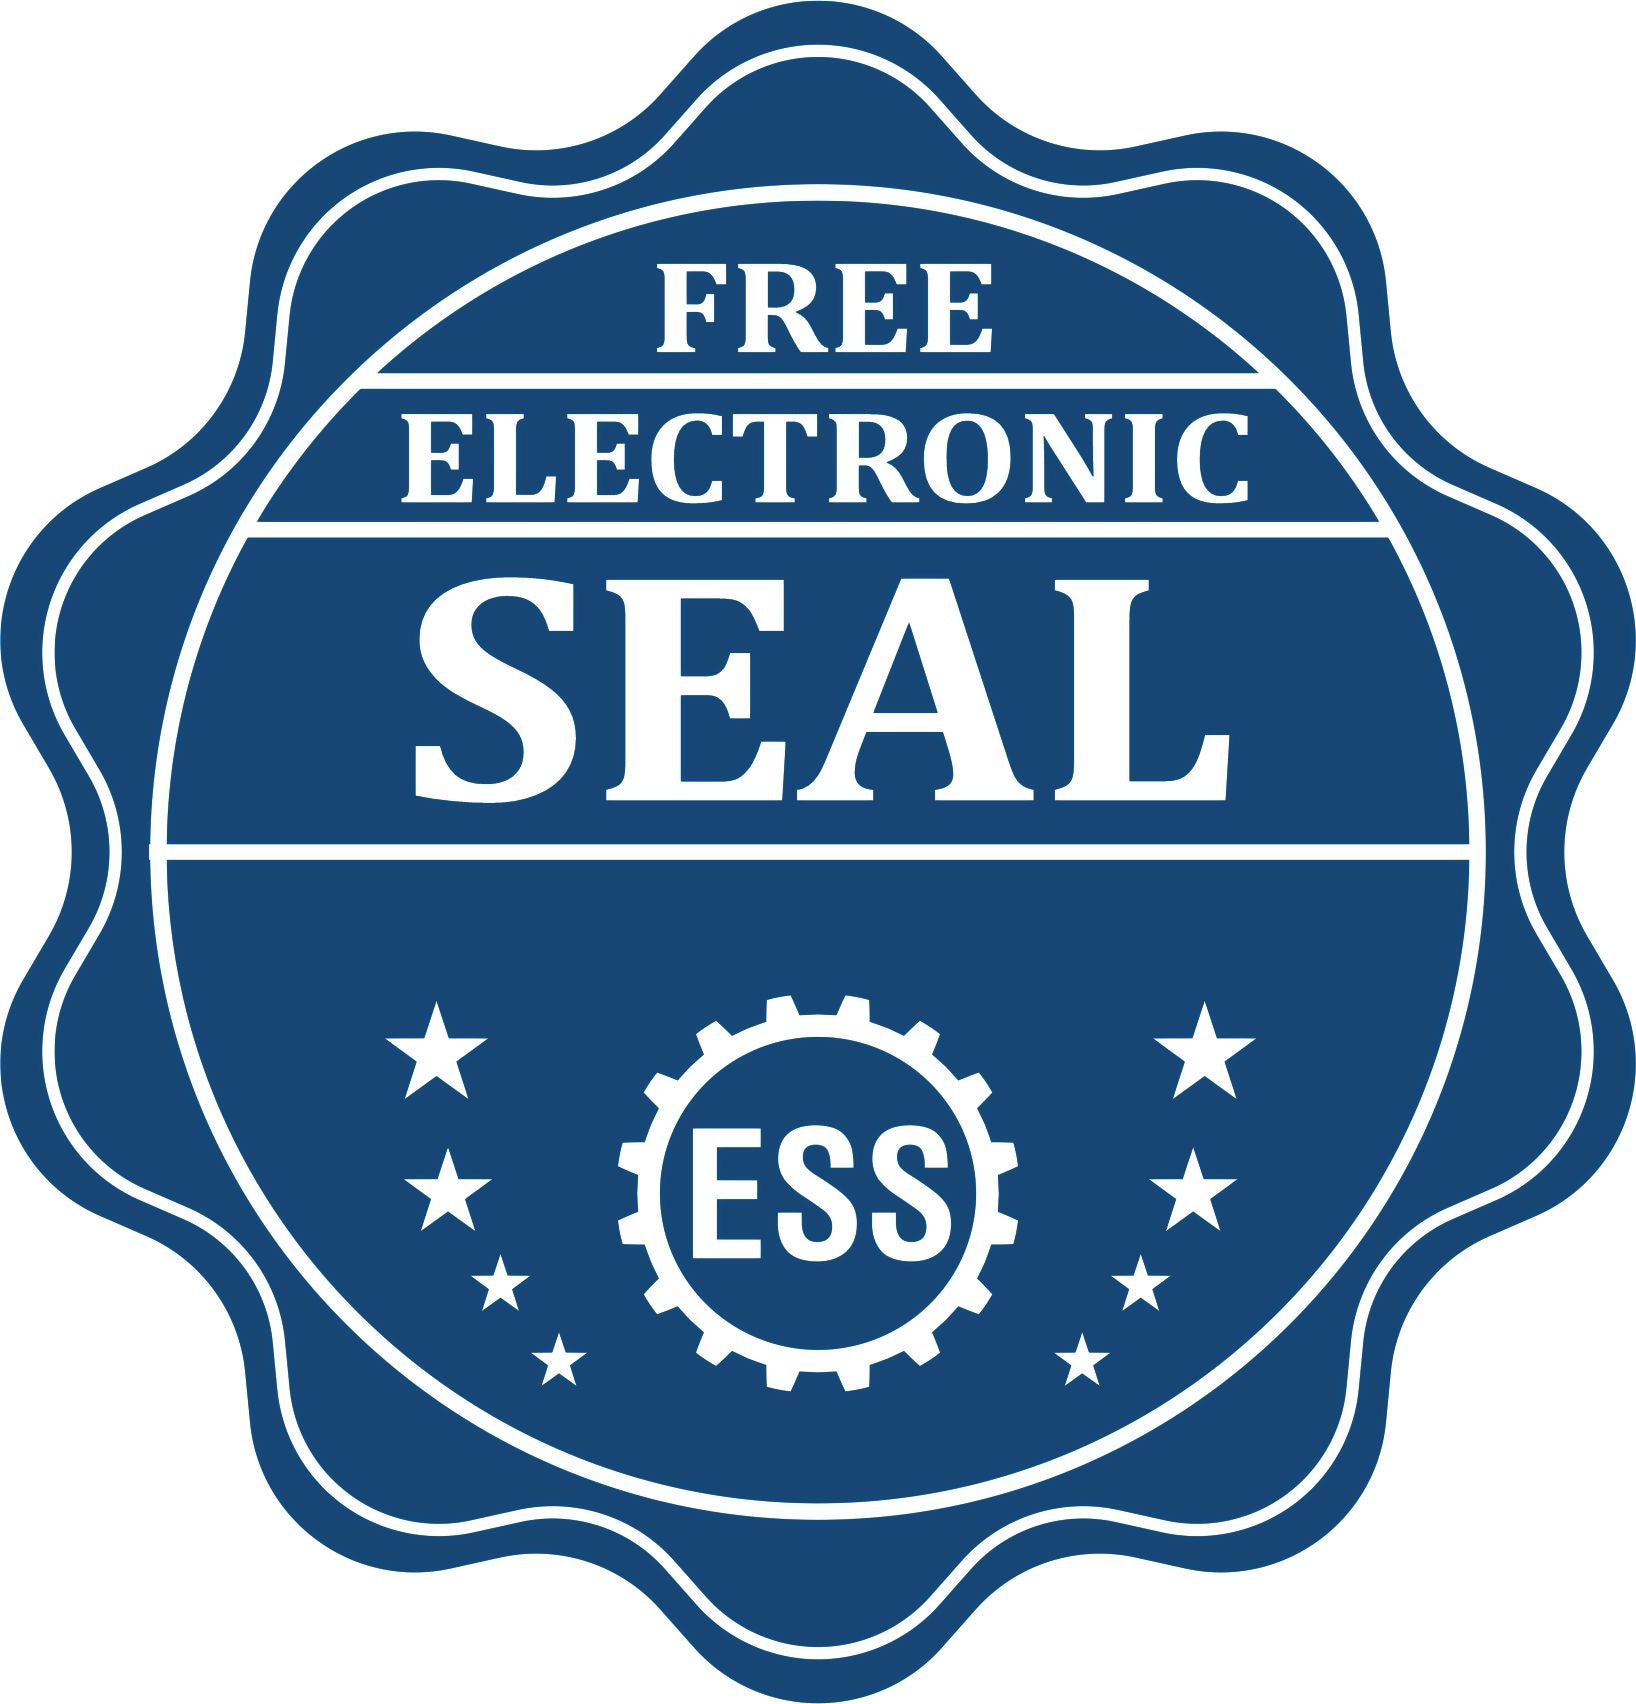 A badge showing a free electronic seal for the Long Reach South Carolina PE Seal with stars and the ESS gear on the emblem.